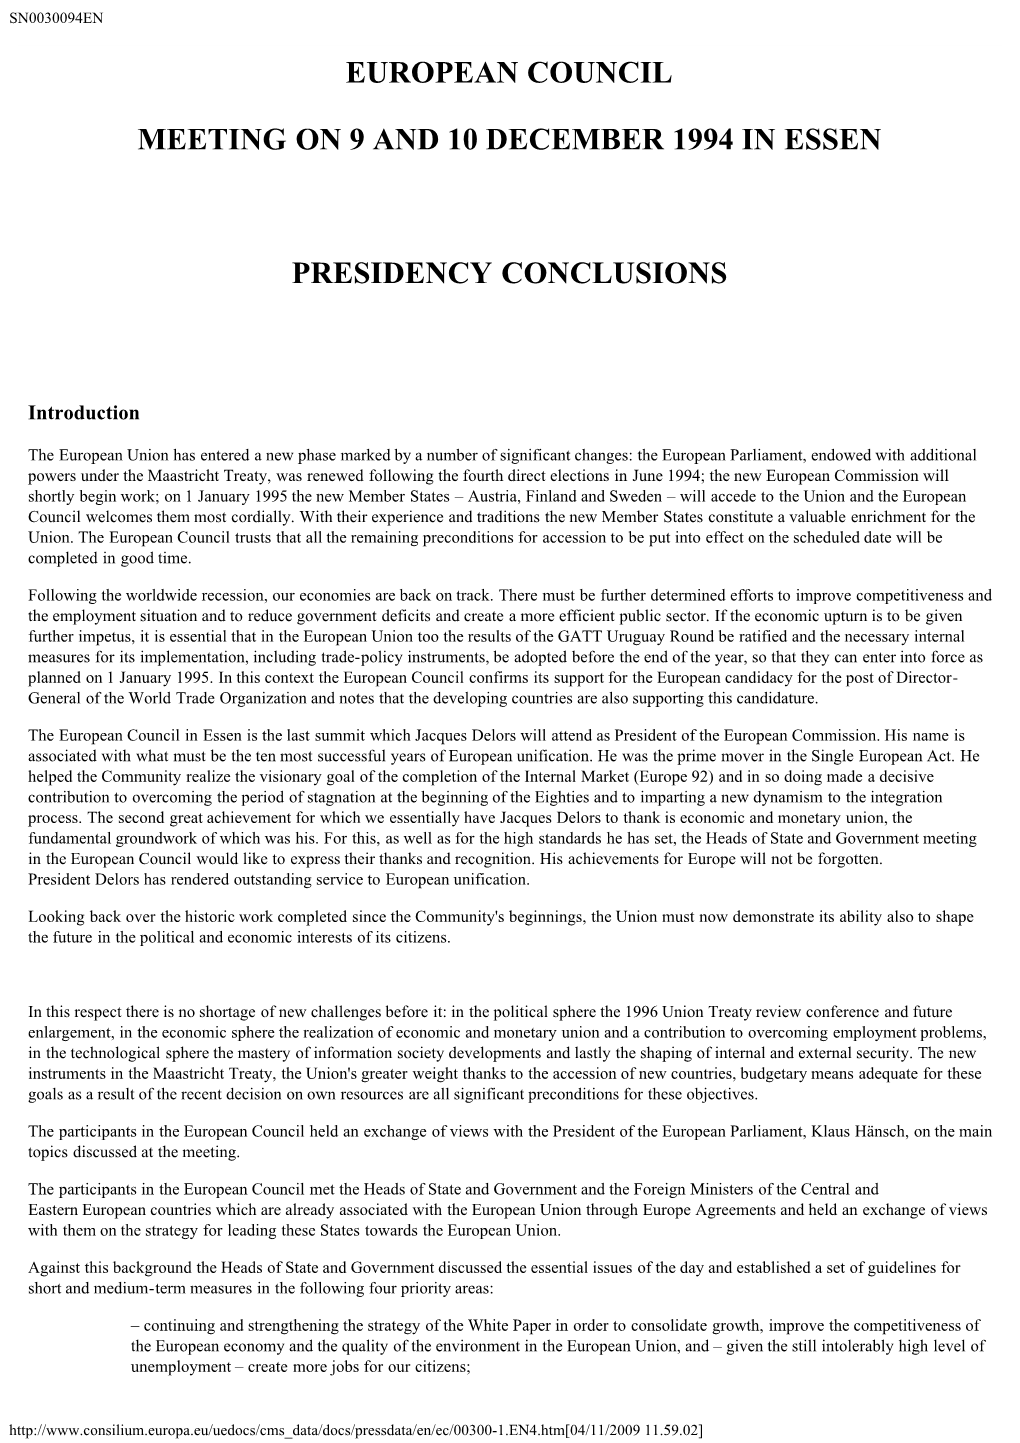 European Council Meeting on 9 and 10 December 1994 in Essen Presidency Conclusions